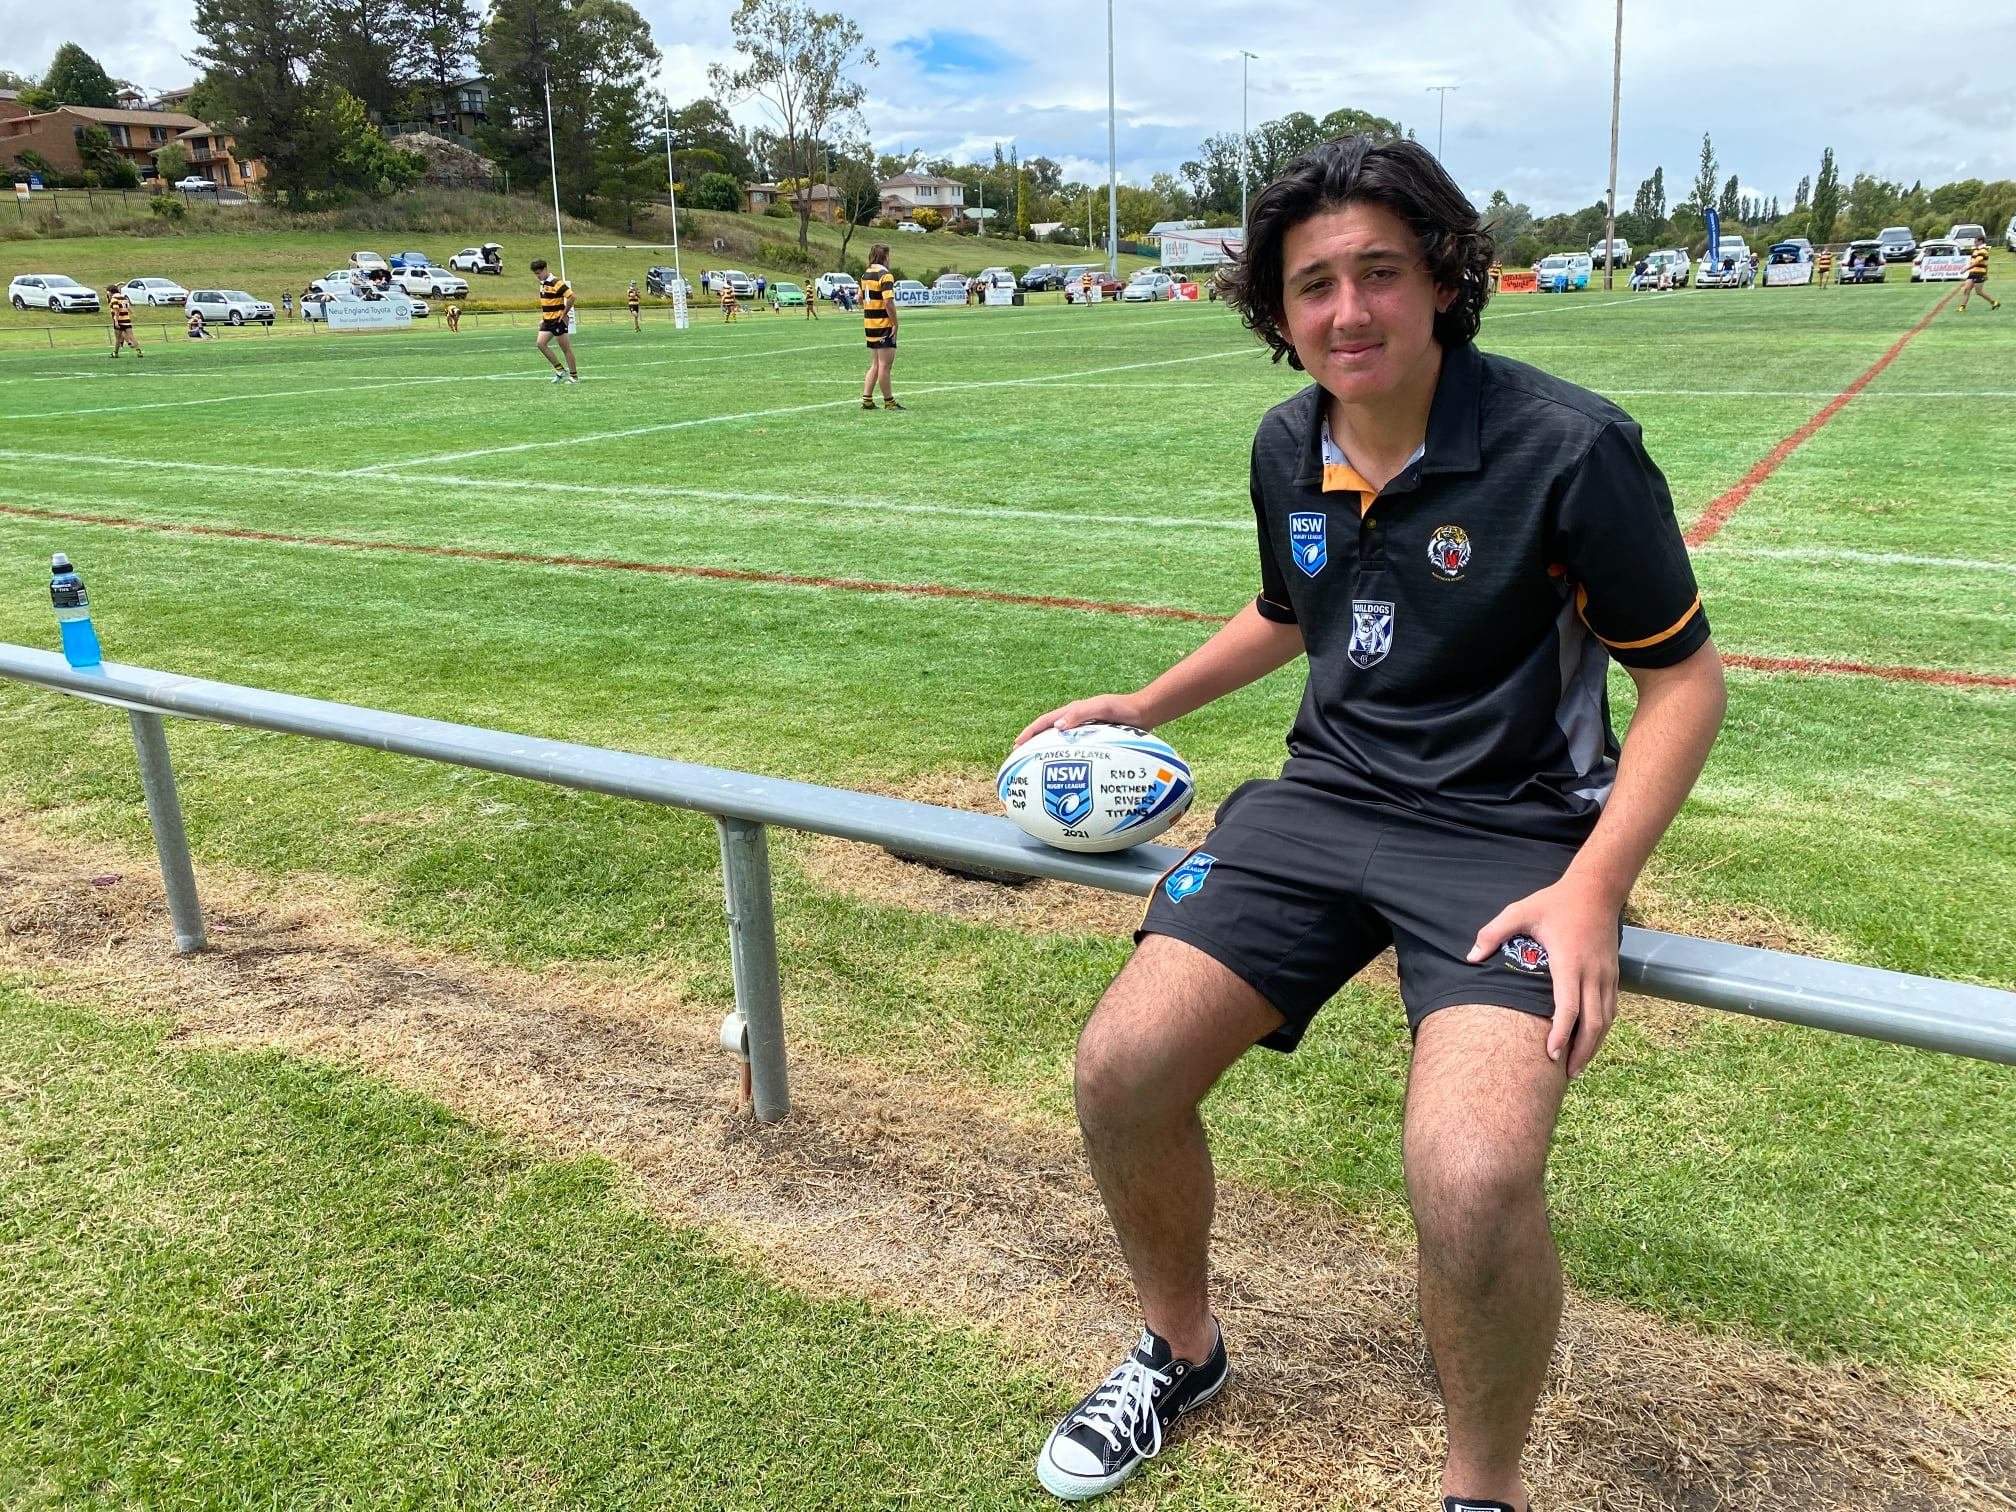 Pic: Logan Spinks and his game ball after a testing time in the pack at Armidale Rugby League Park on Saturday